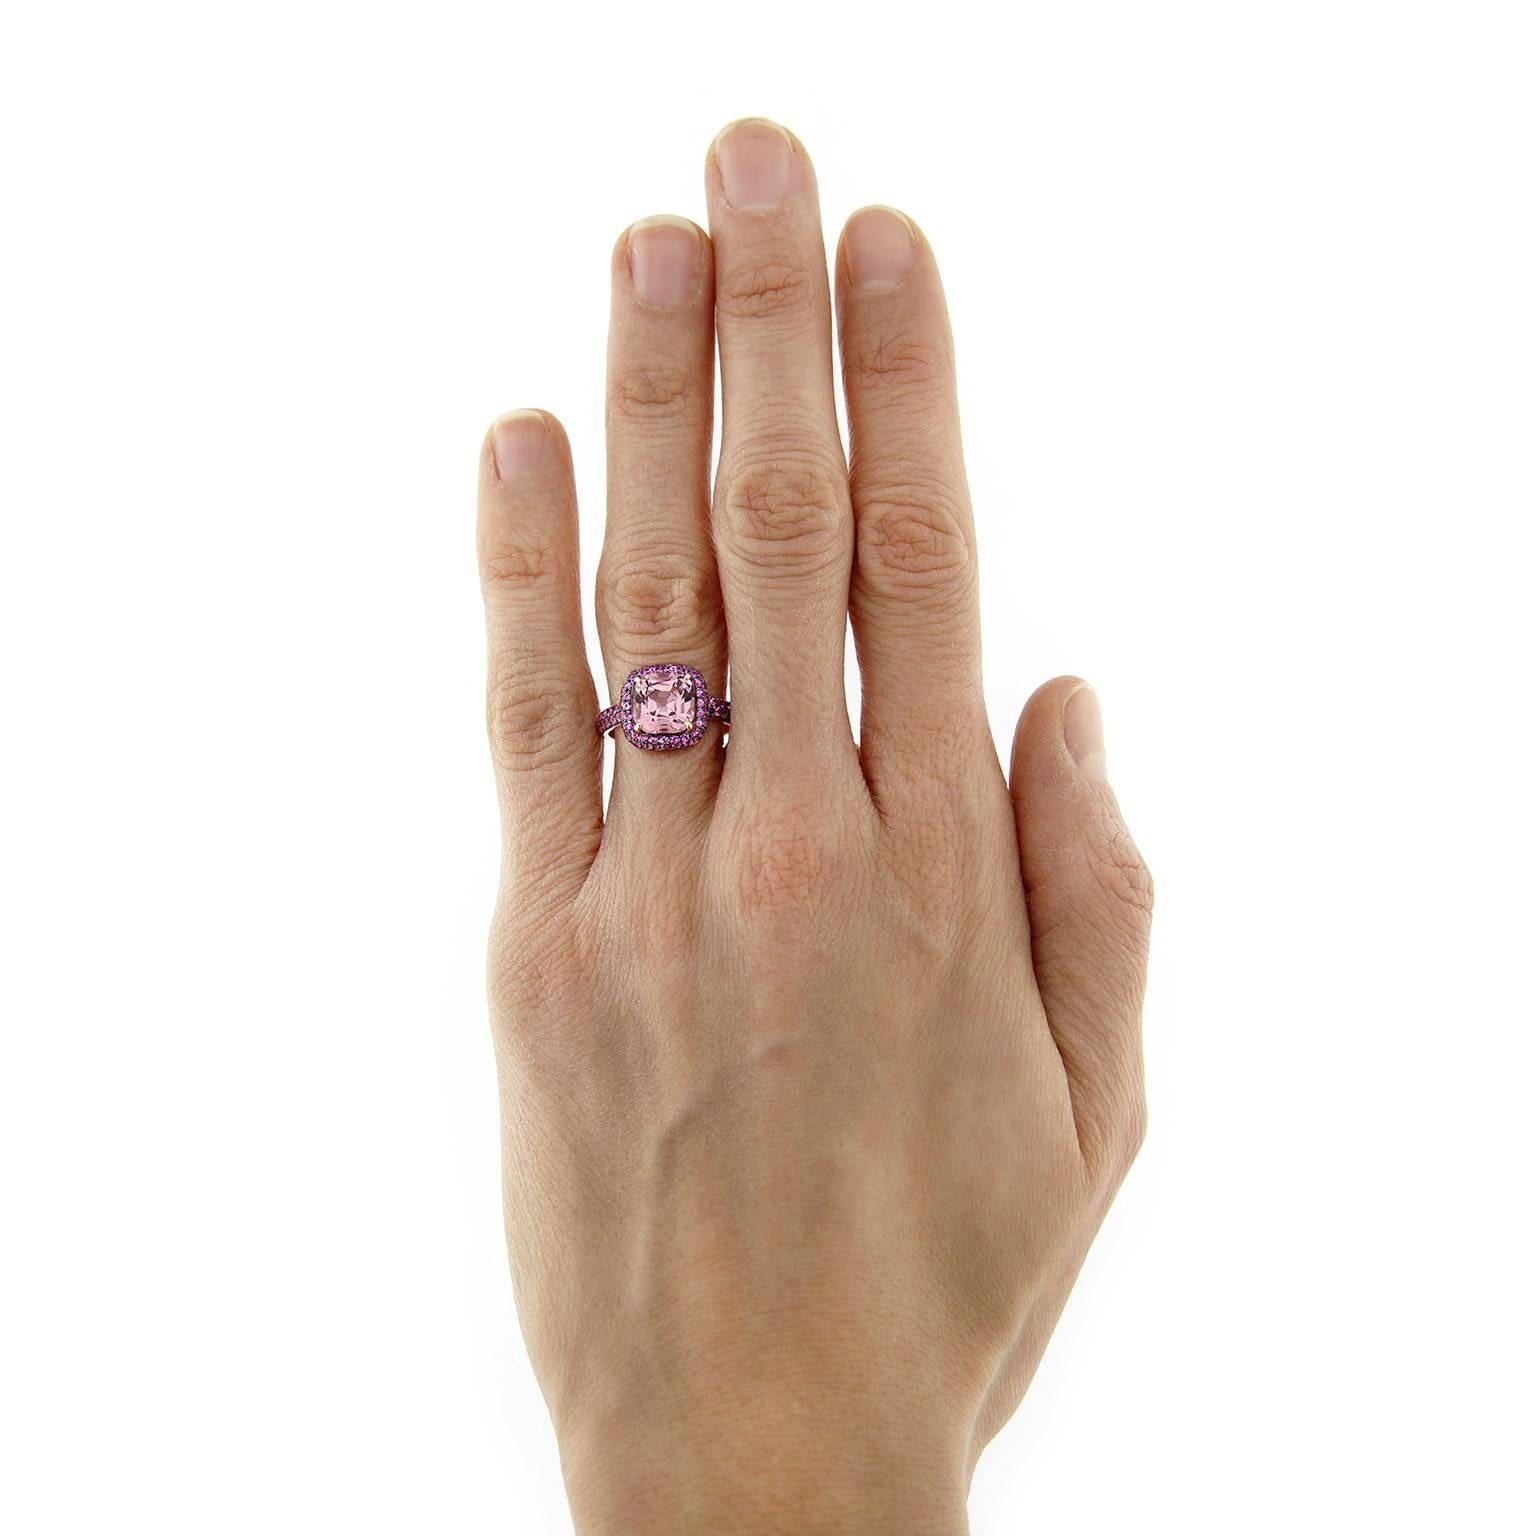 Jona one-of-a-kind collection, designed and hand crafted in Italy, 18 Karat rose gold ring, centering a cushion cut pink Spinel weighing 3.10 carats, surrounded by a pink Sapphire Pavé weighing 1.84 carats. Signed Jona. 
Ring Size: US 6 (can be